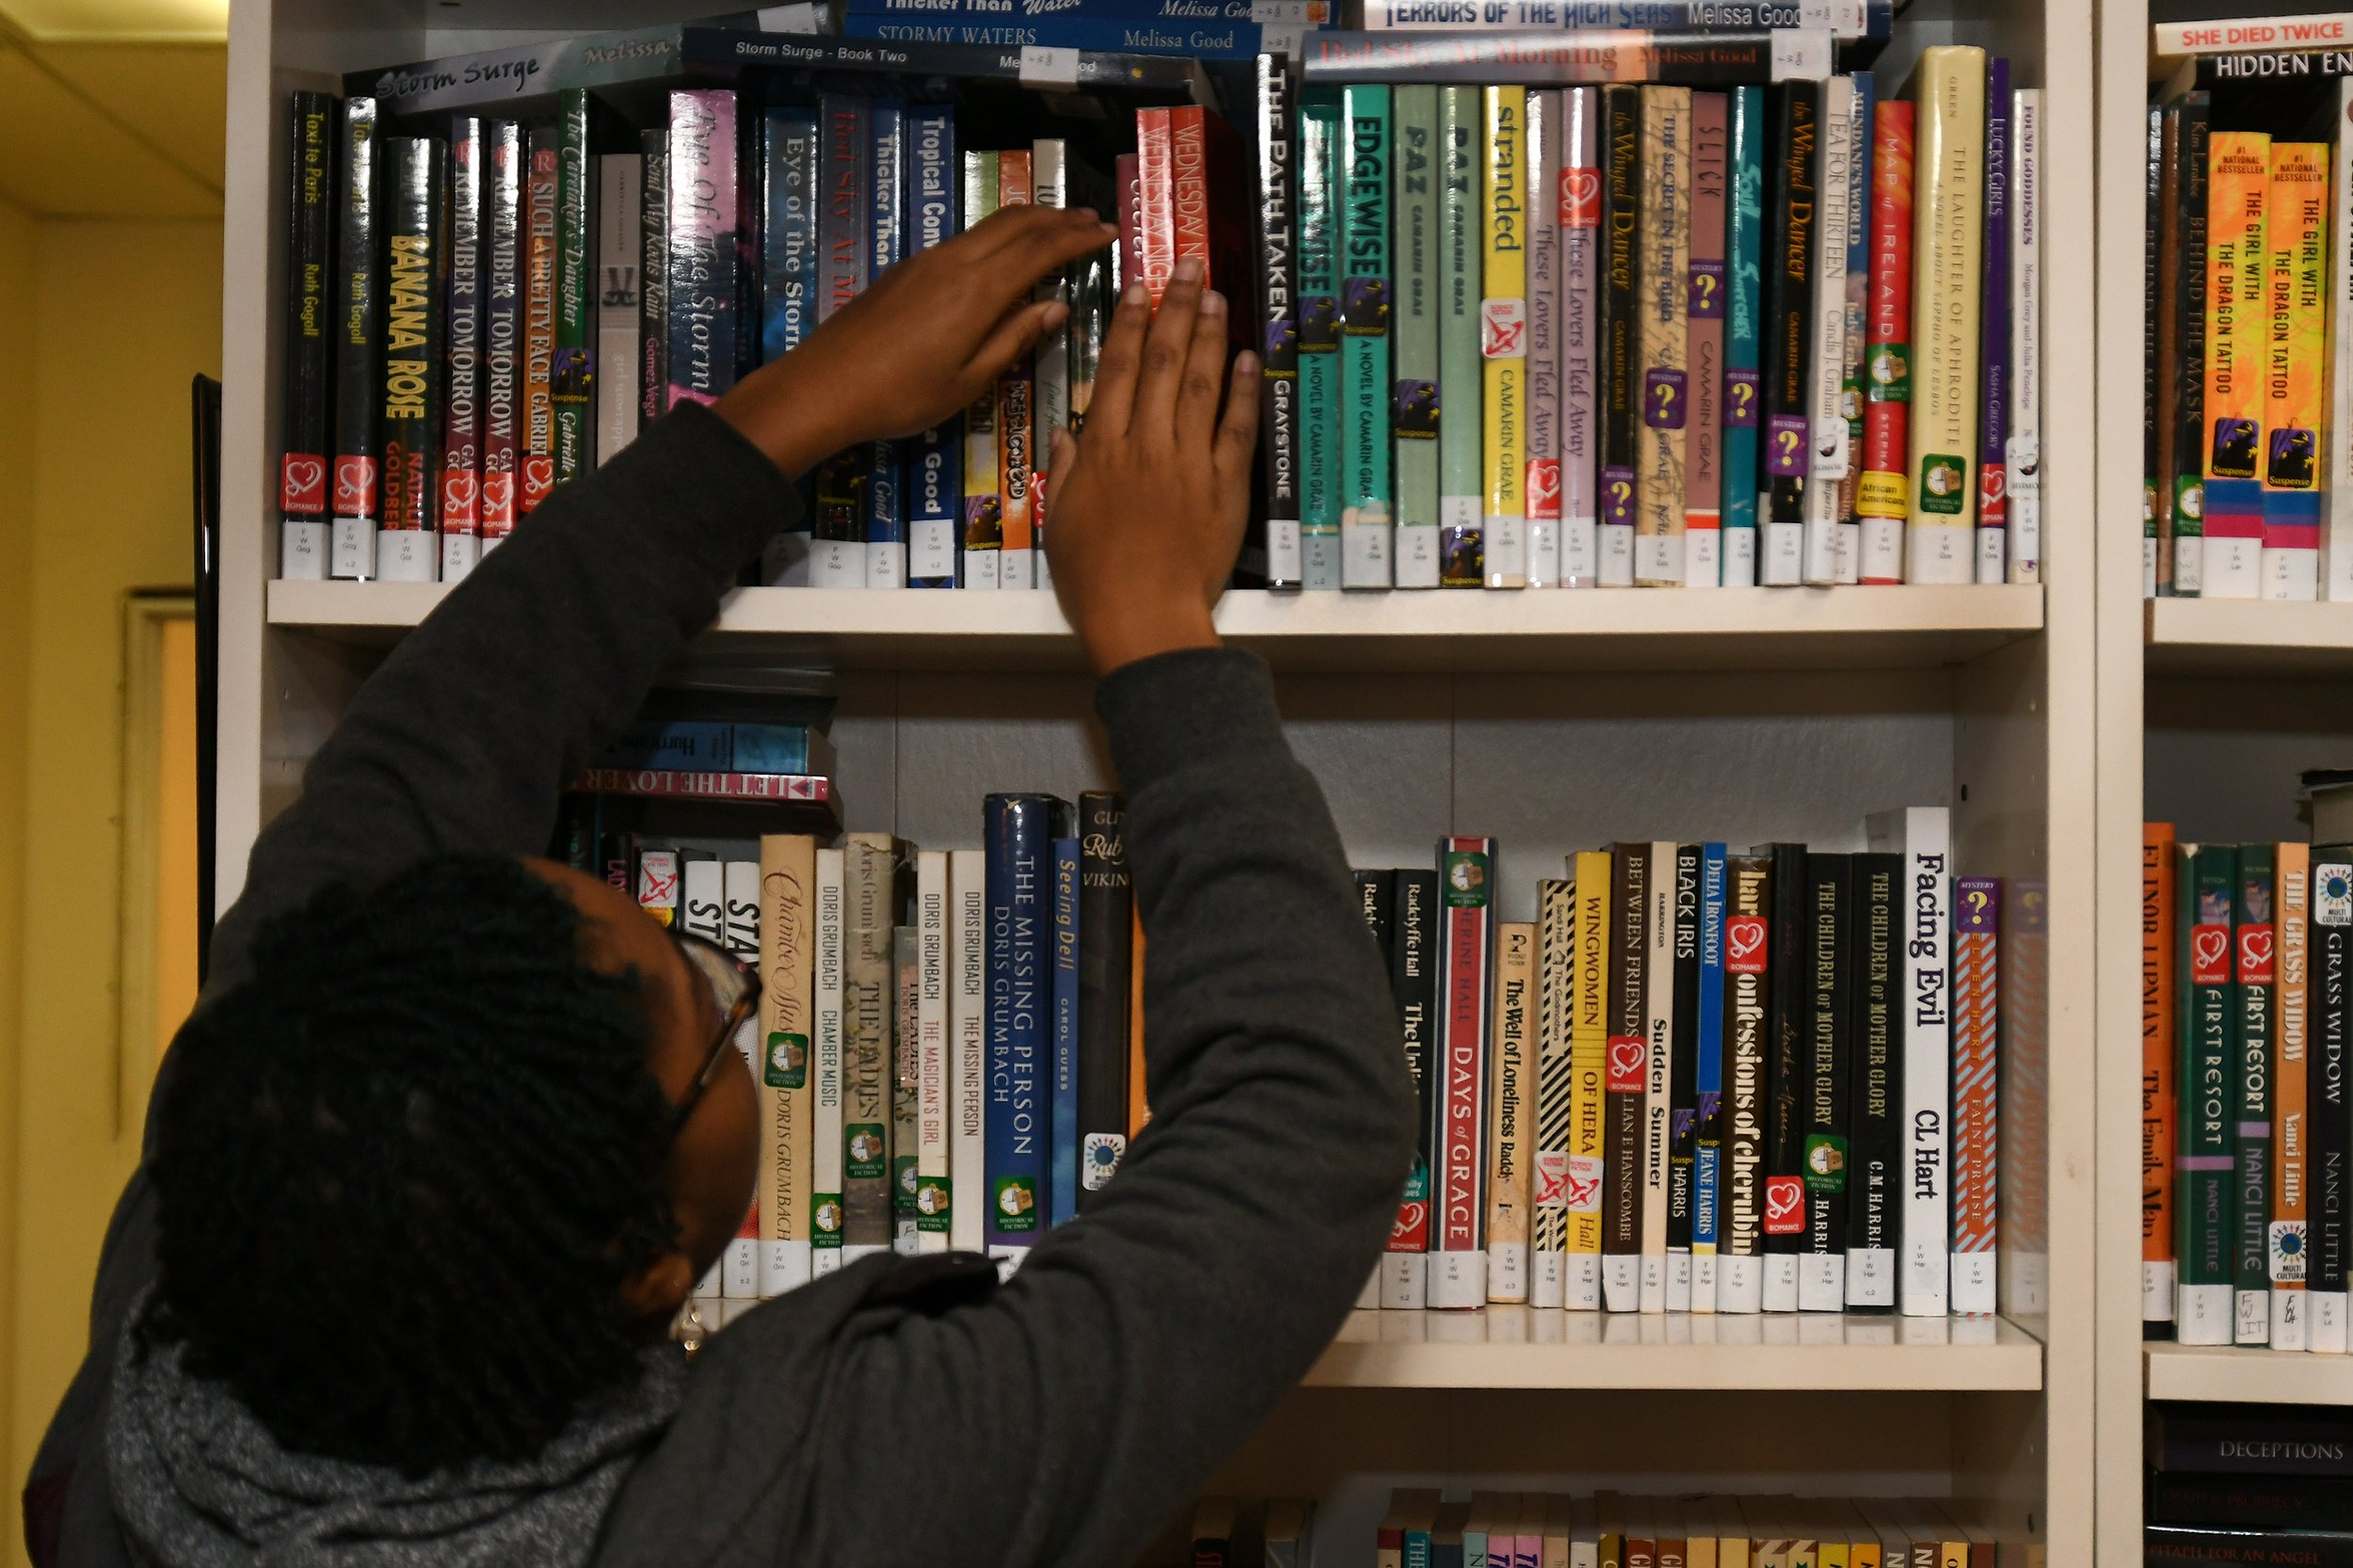 Person in front of library bookshelf.